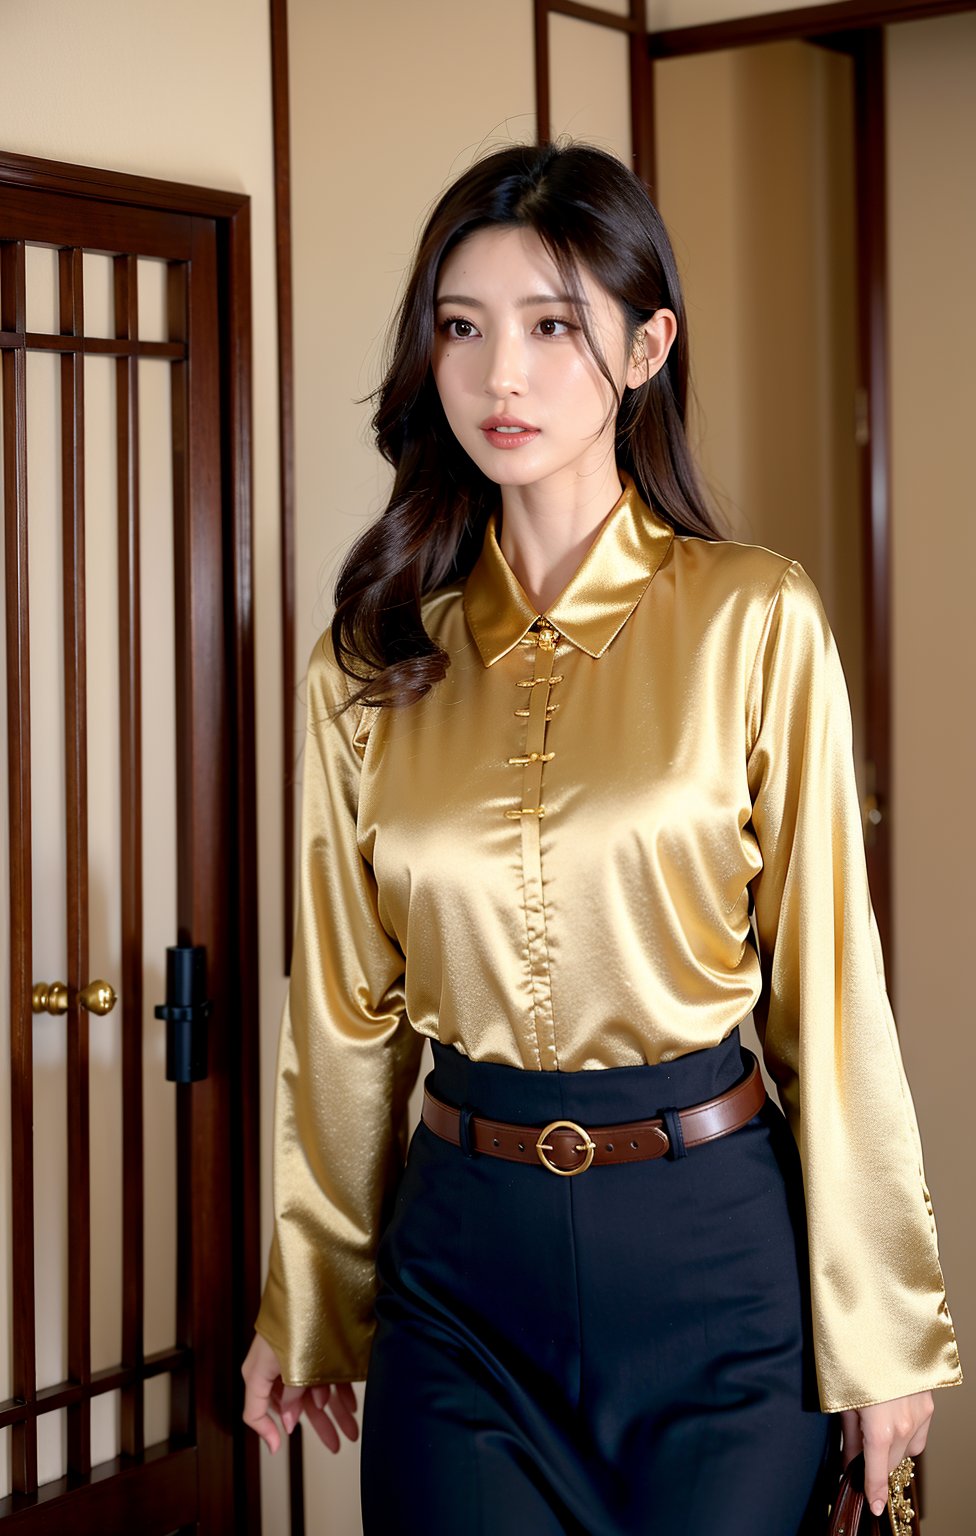 a mature Japanese woman (Lioka) standing indoors next to a wooden door frame. She has a fair complexion, dark straight hair styled neatly with a parting, and dark almond-shaped eyes with defined eyebrows. She is wearing a high-collared, long-sleeved cream blouse with a floral brooch near the collar, and a dark blue skirt with intricate floral embroidery paired with a wide, ornate gold belt. The setting should have natural light coming from the left, highlighting her calm and composed expression, blending traditional and elegant styles. 
Highres, best quality, raw photo, masterpiece, 4k, 8k, blurry background, bokeh.